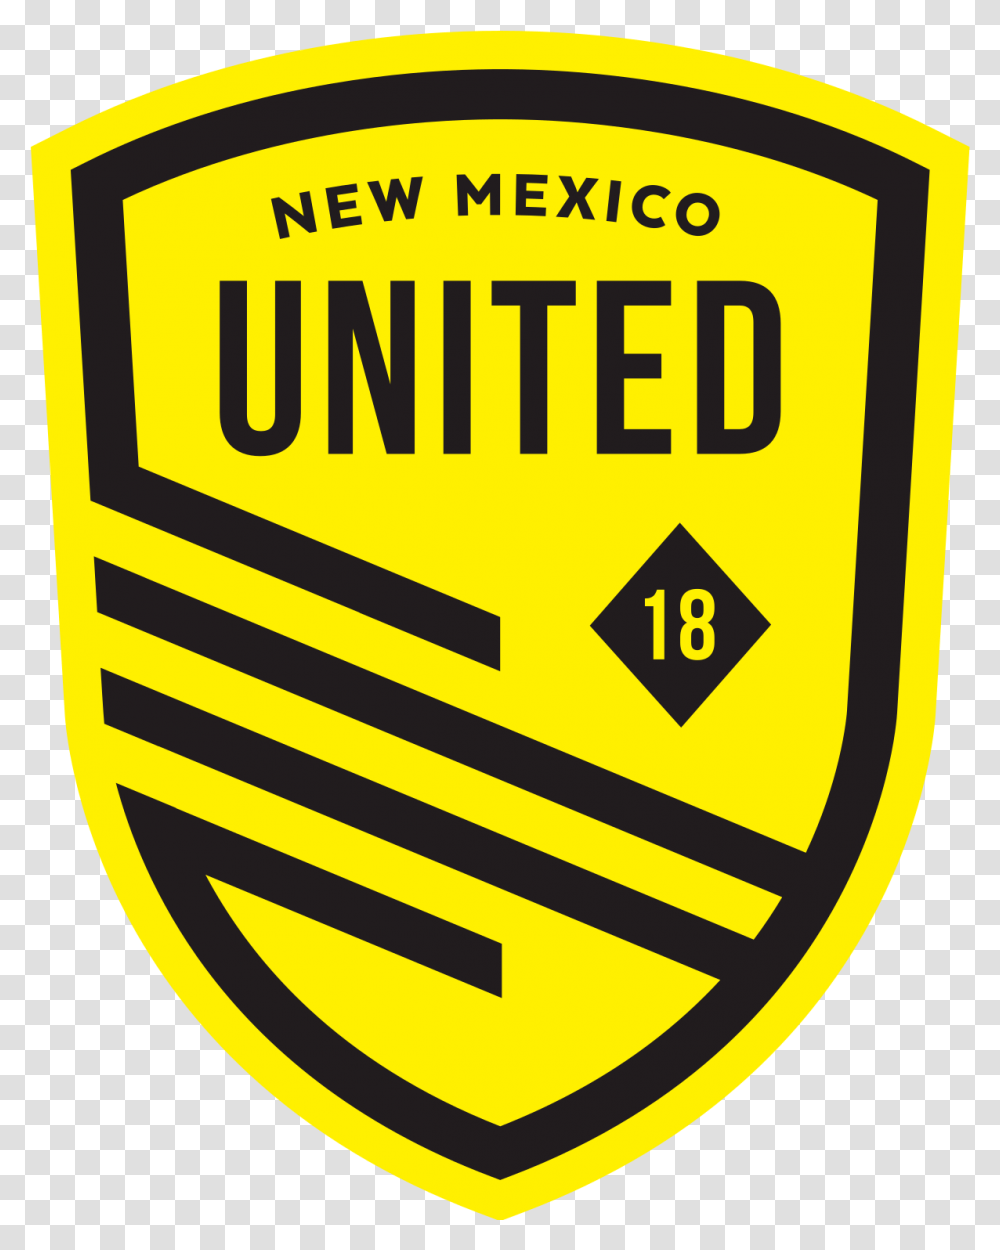 New Mexico United New Mexico United Logo, Symbol, Trademark, Badge Transparent Png